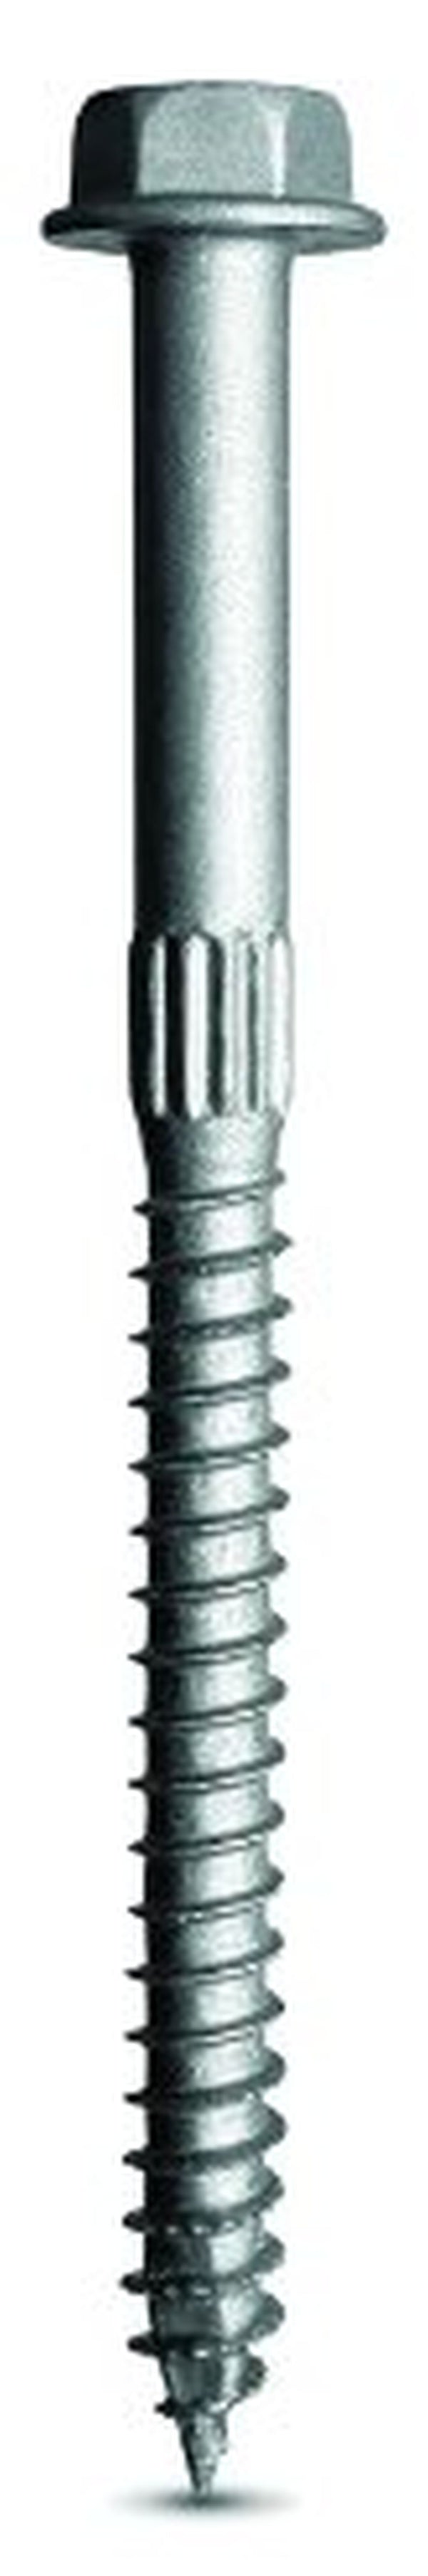 Simpson Strong-Tie SDS25800-R50 1/4x8 Hex Drive Hex Head Double-Barrier Coating Steel Structural Screws, 50/Box